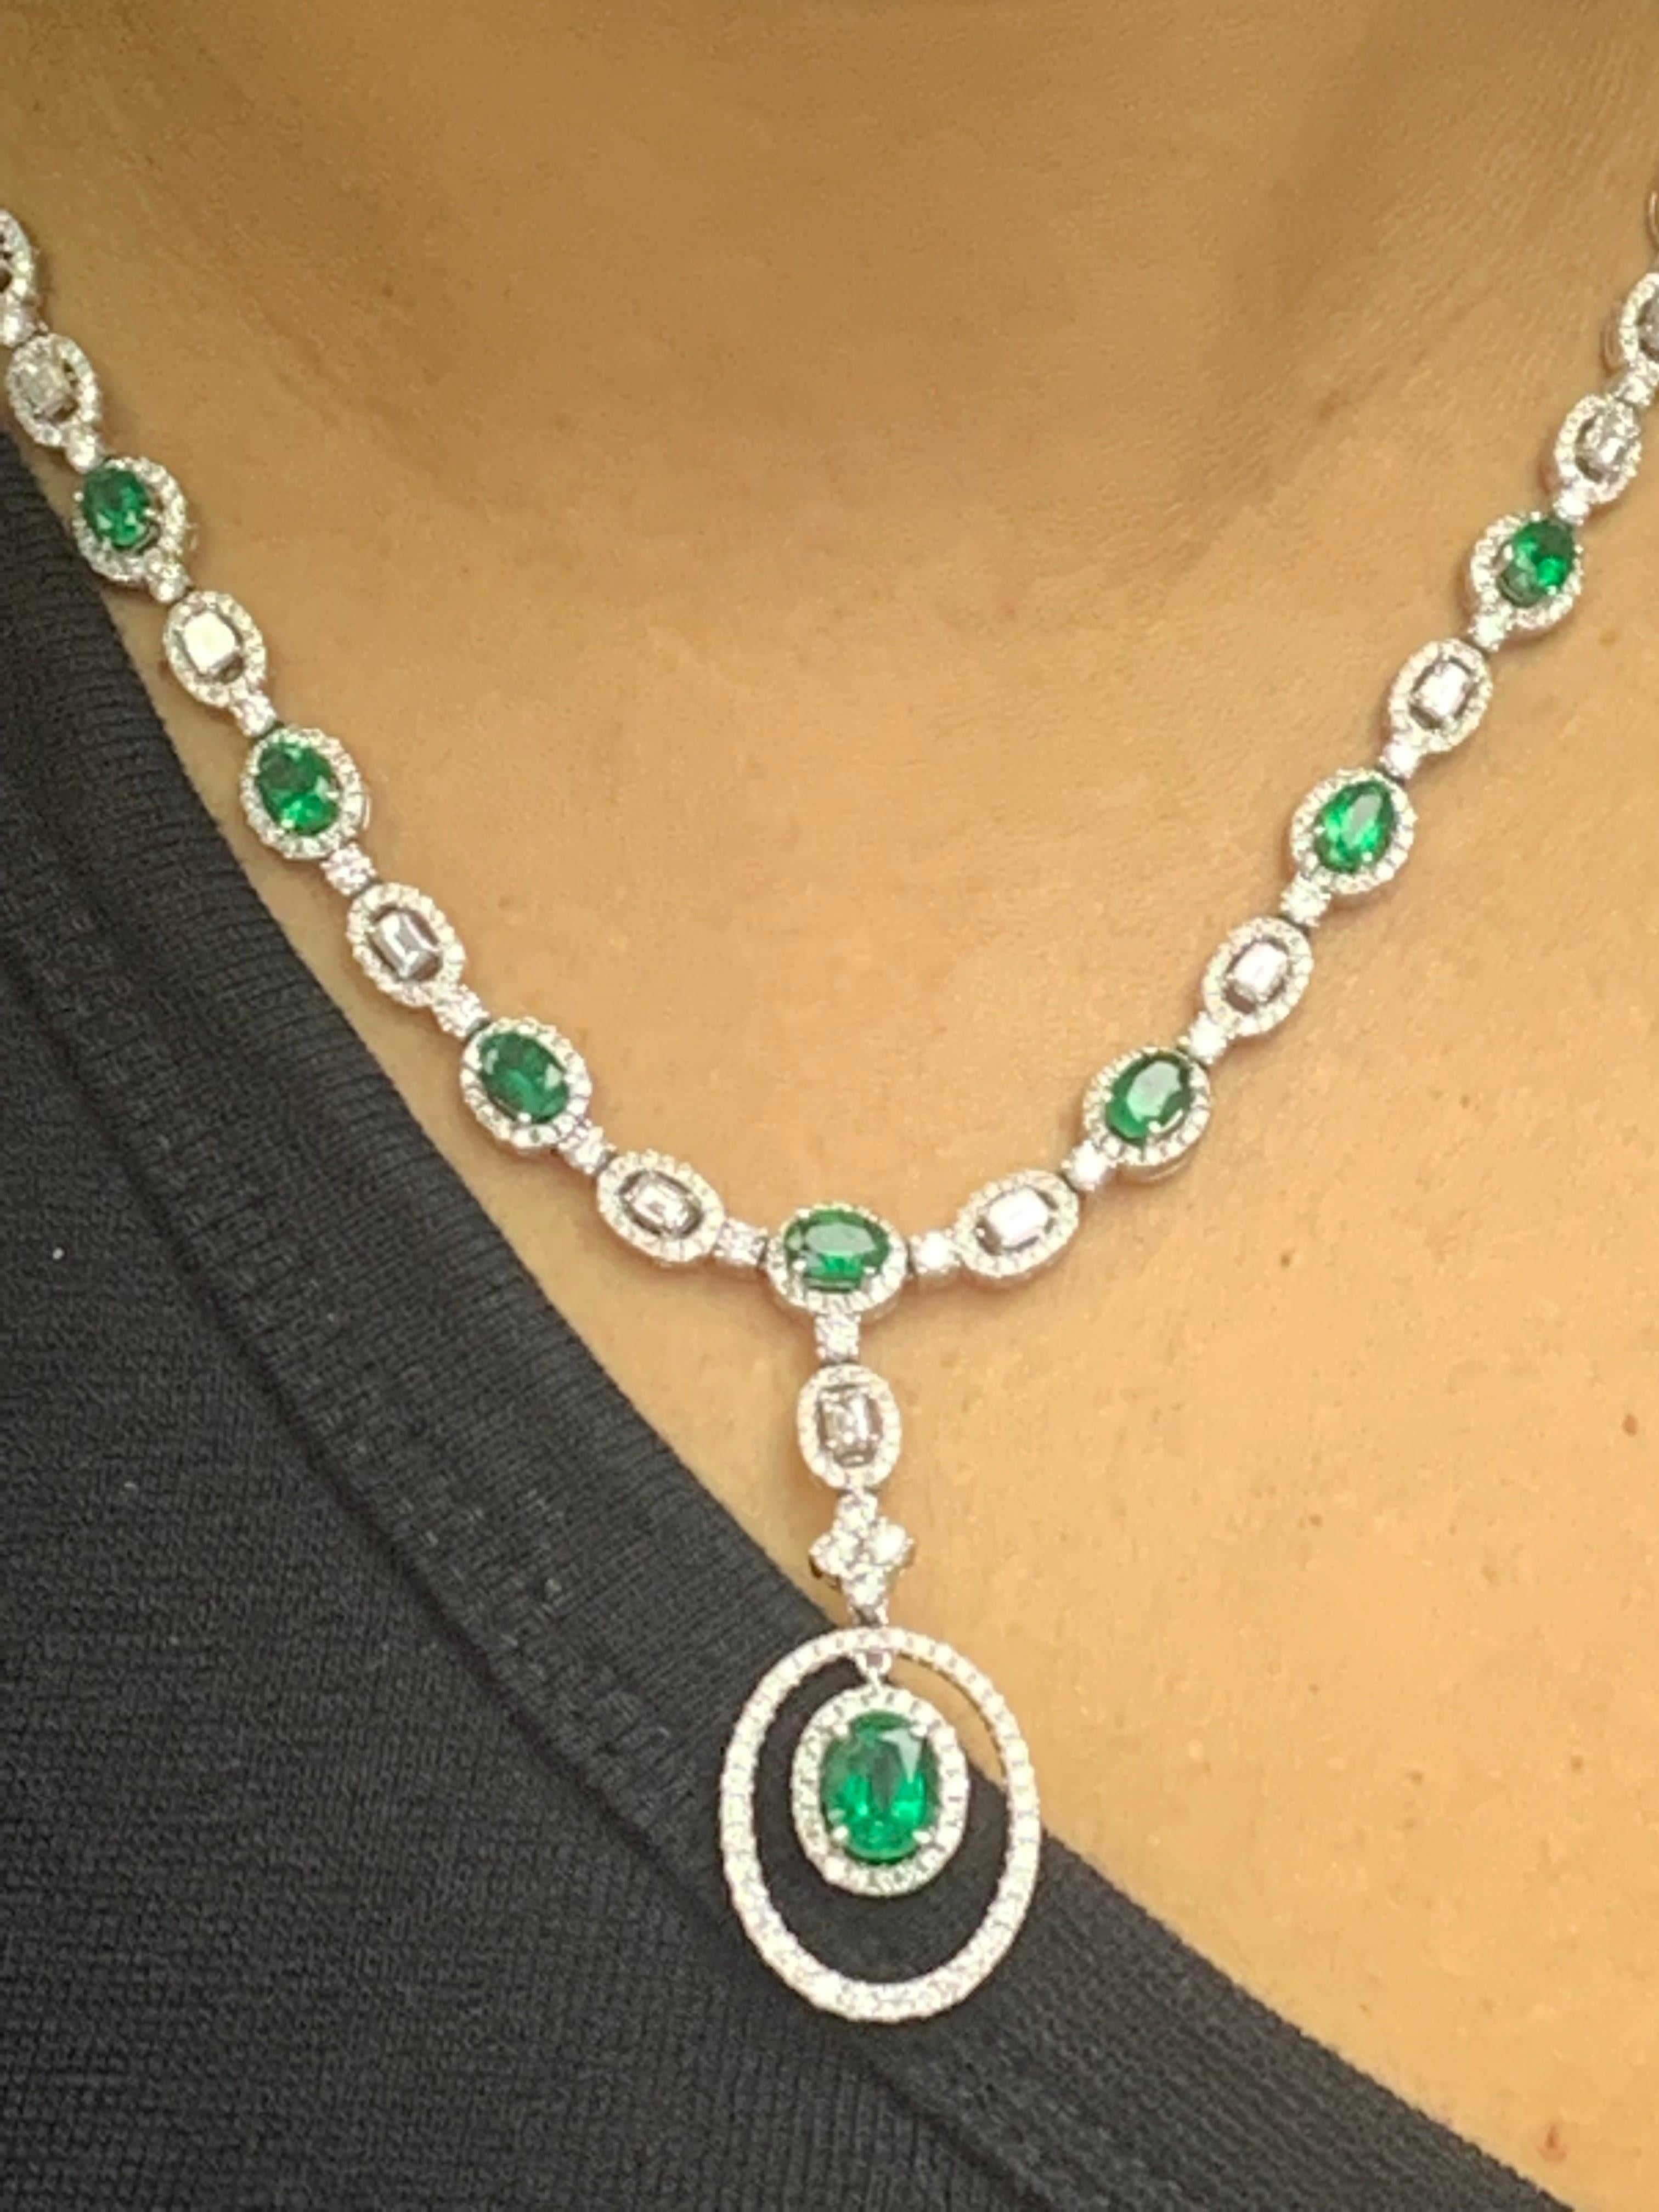 4.21 Carat Oval Cut Emerald and Diamond Necklace in 18 White Gold For Sale 4